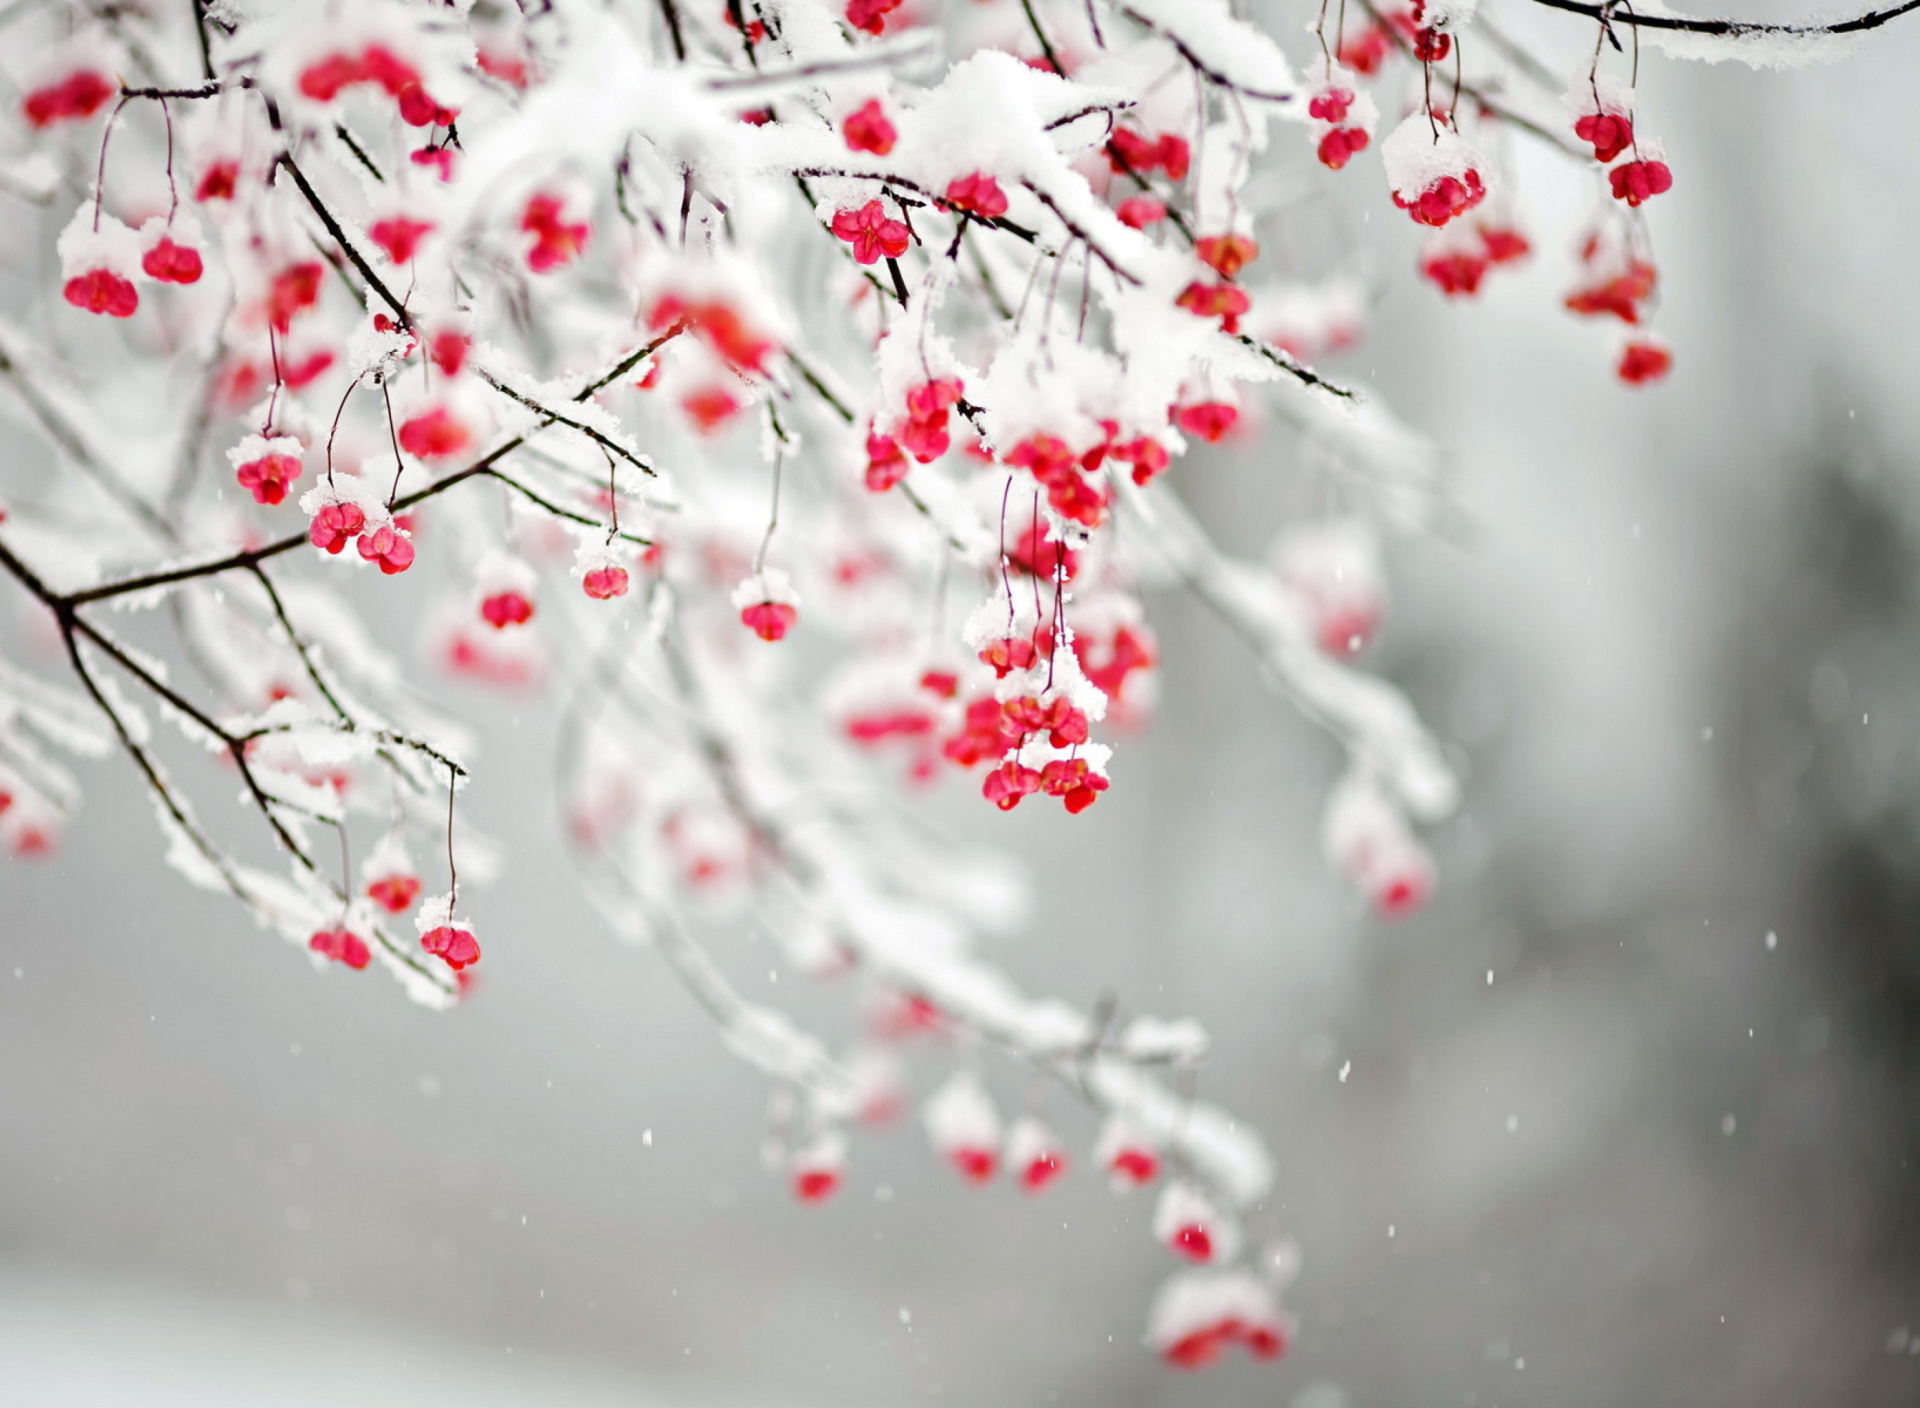 Tree Branches Covered With Snow wallpaper 1920x1408